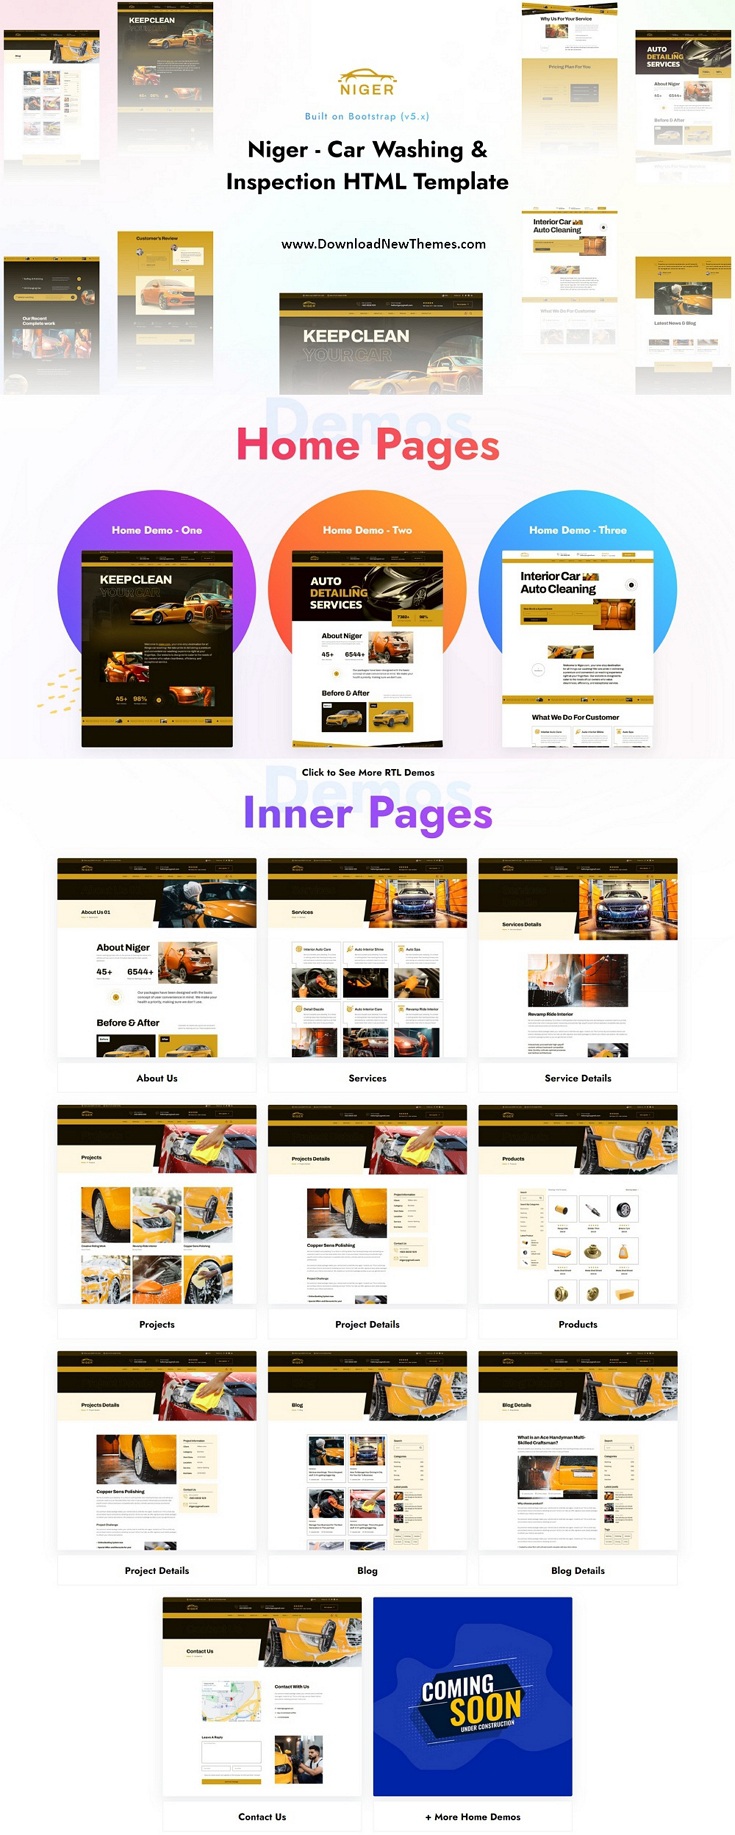 Niger - Car Washing & Inspection HTML Template Review